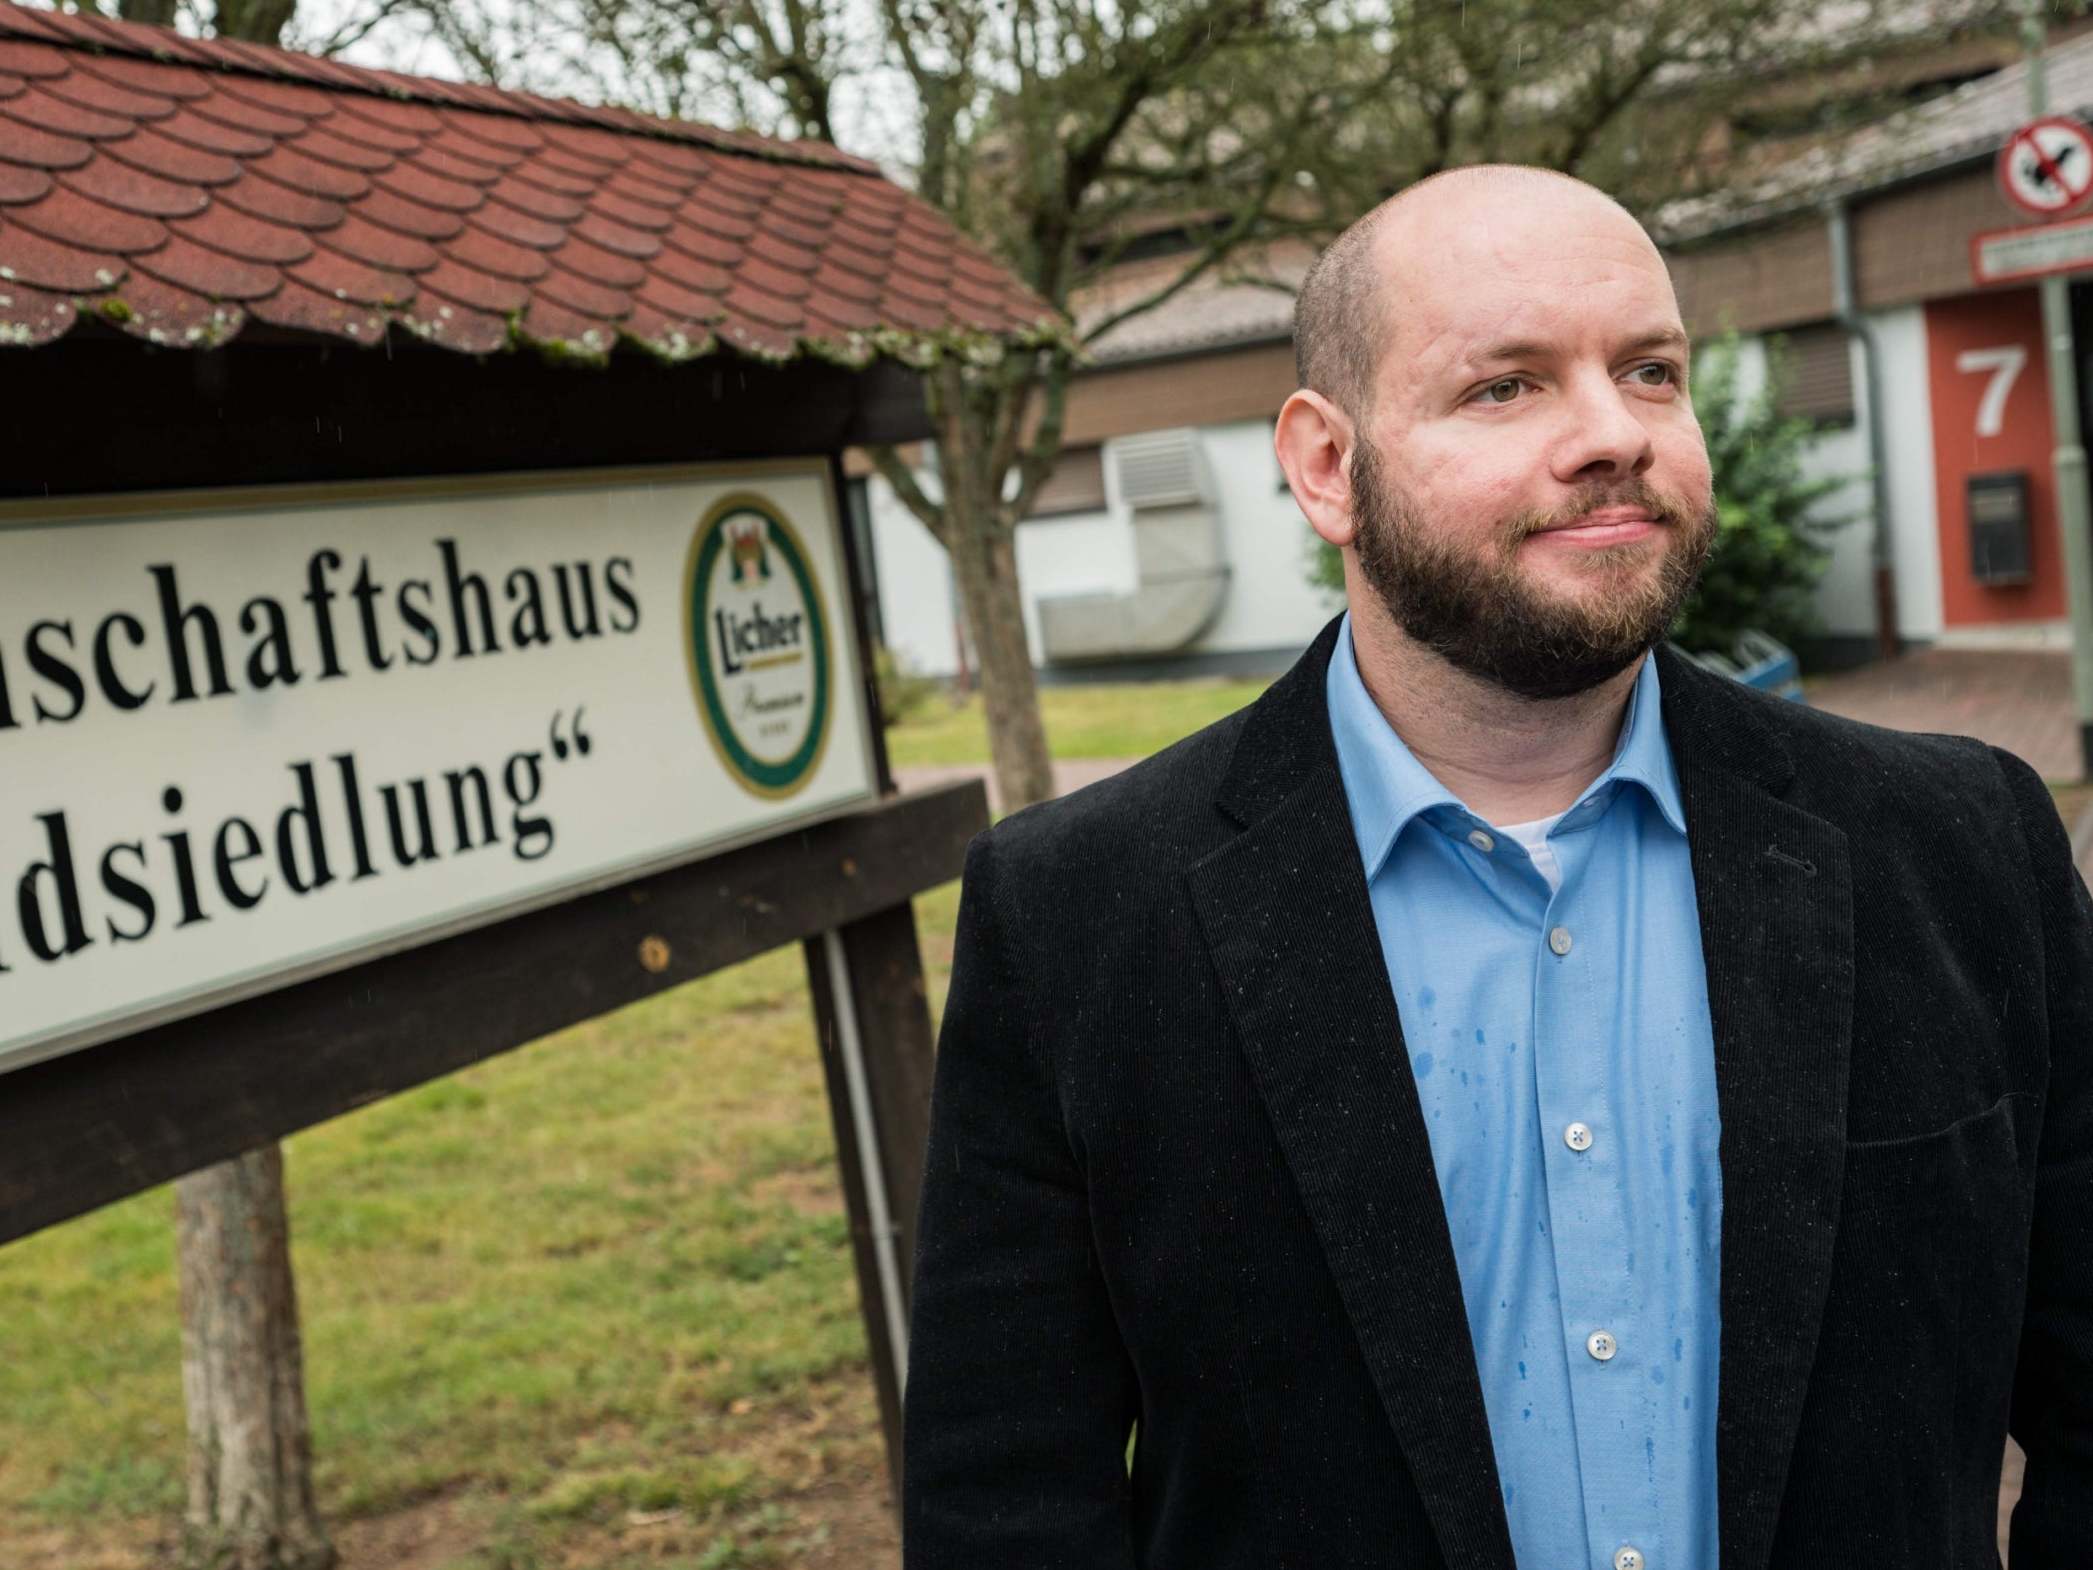 Neo-nazi elected as town council leader in German town